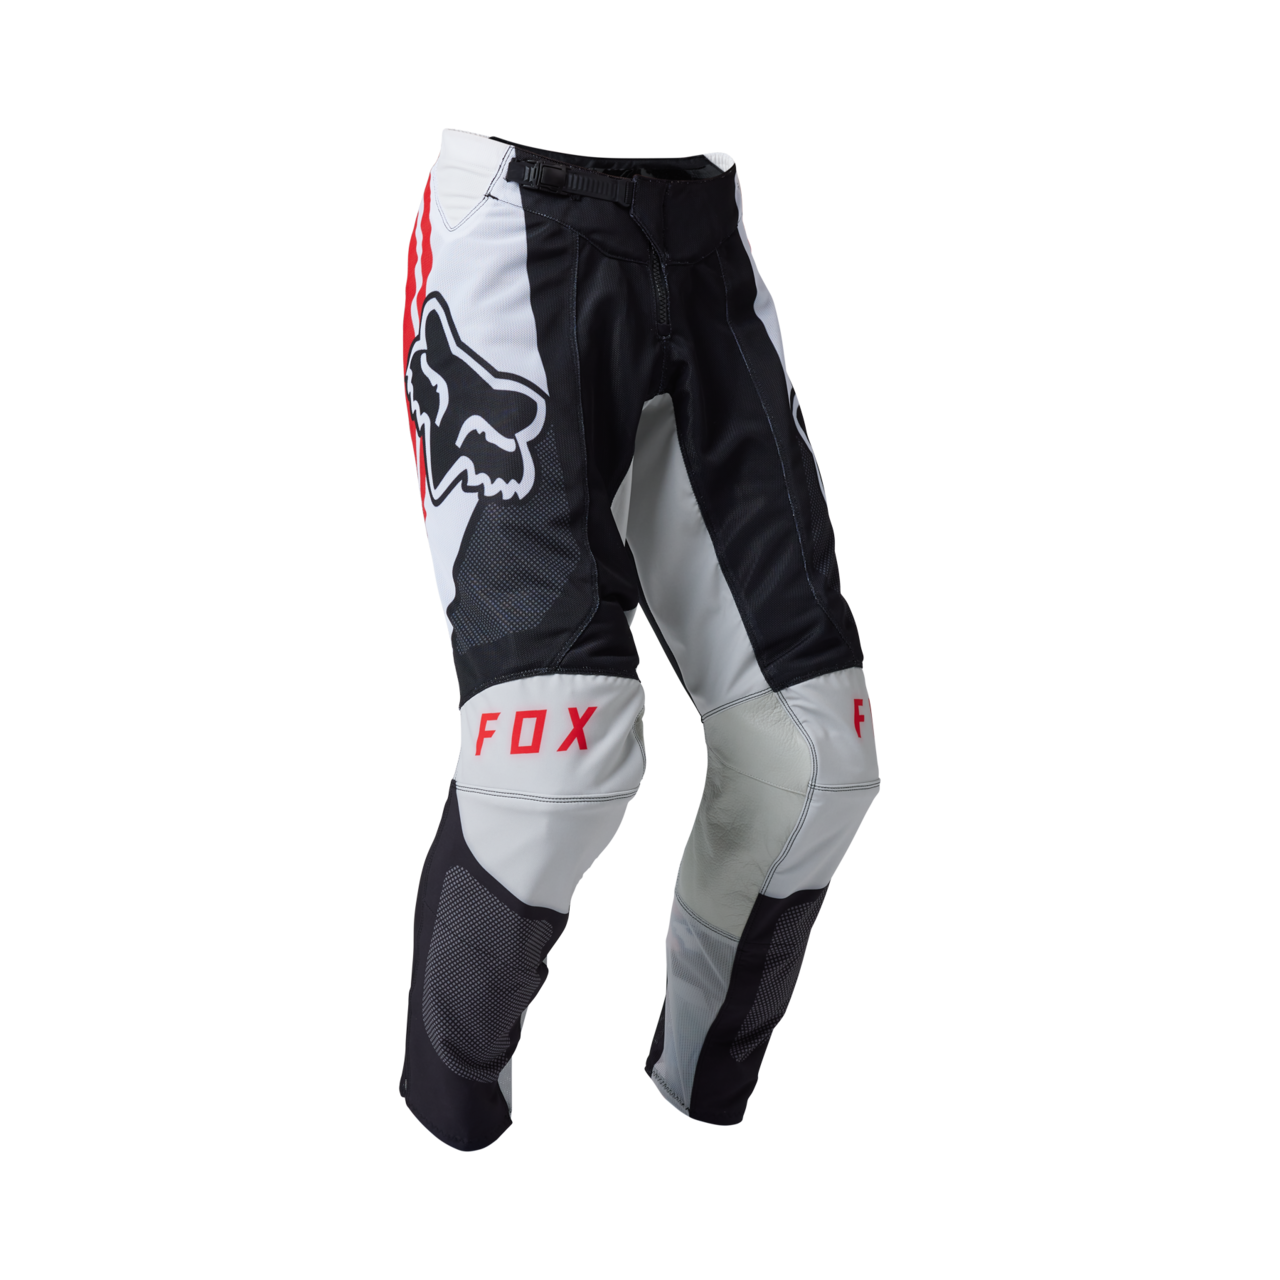 FOX AIRLINE PANT SENSORY FLO RED - GH Motorcycles